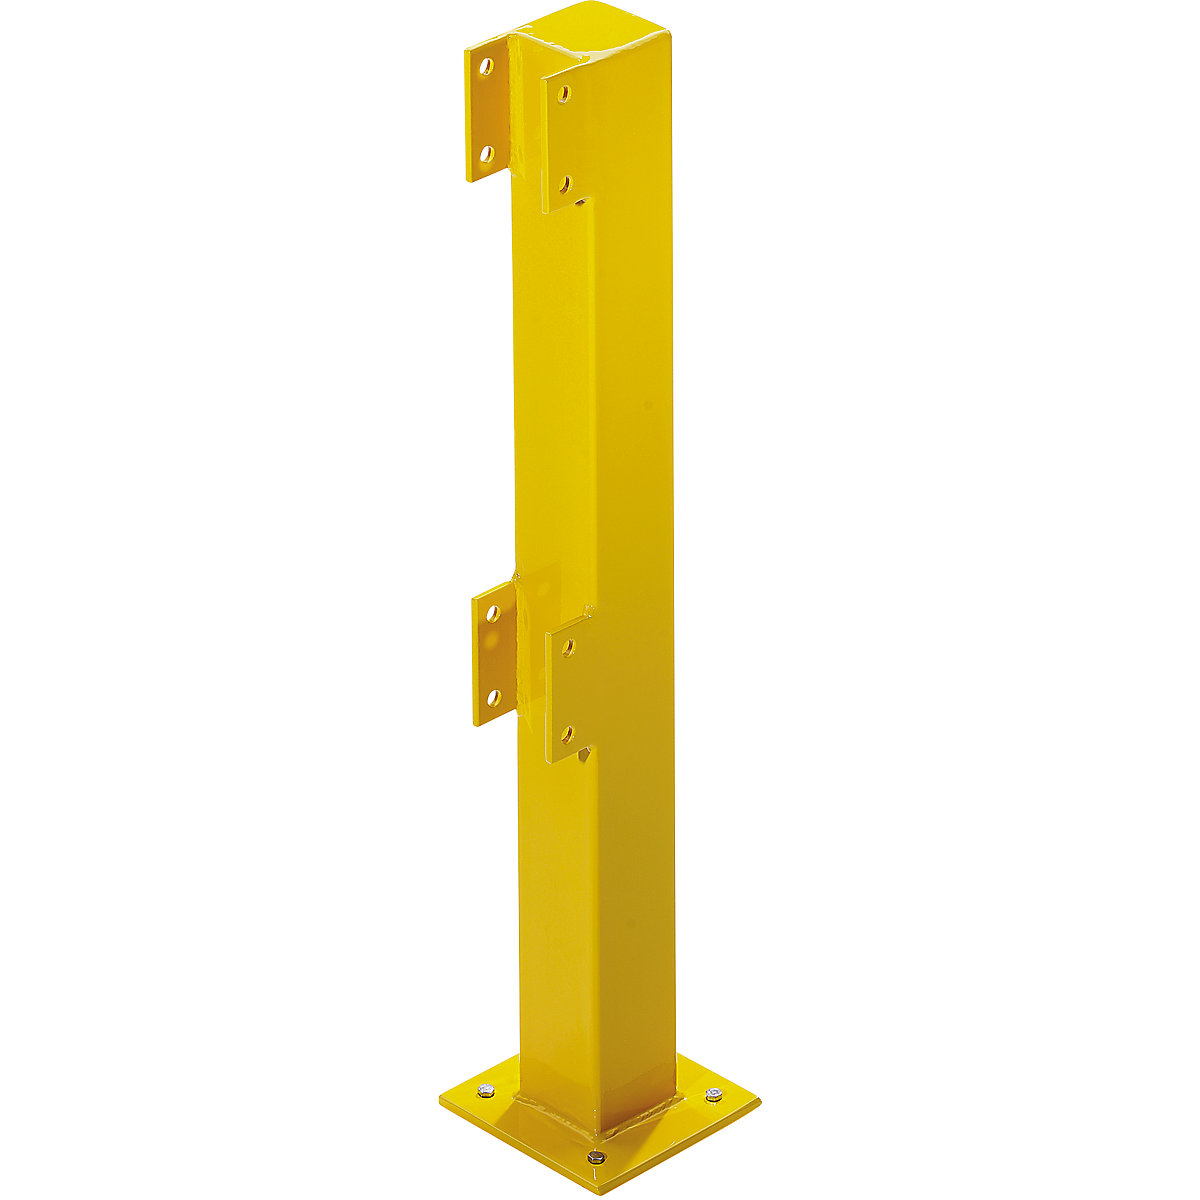 Posts for safety railing